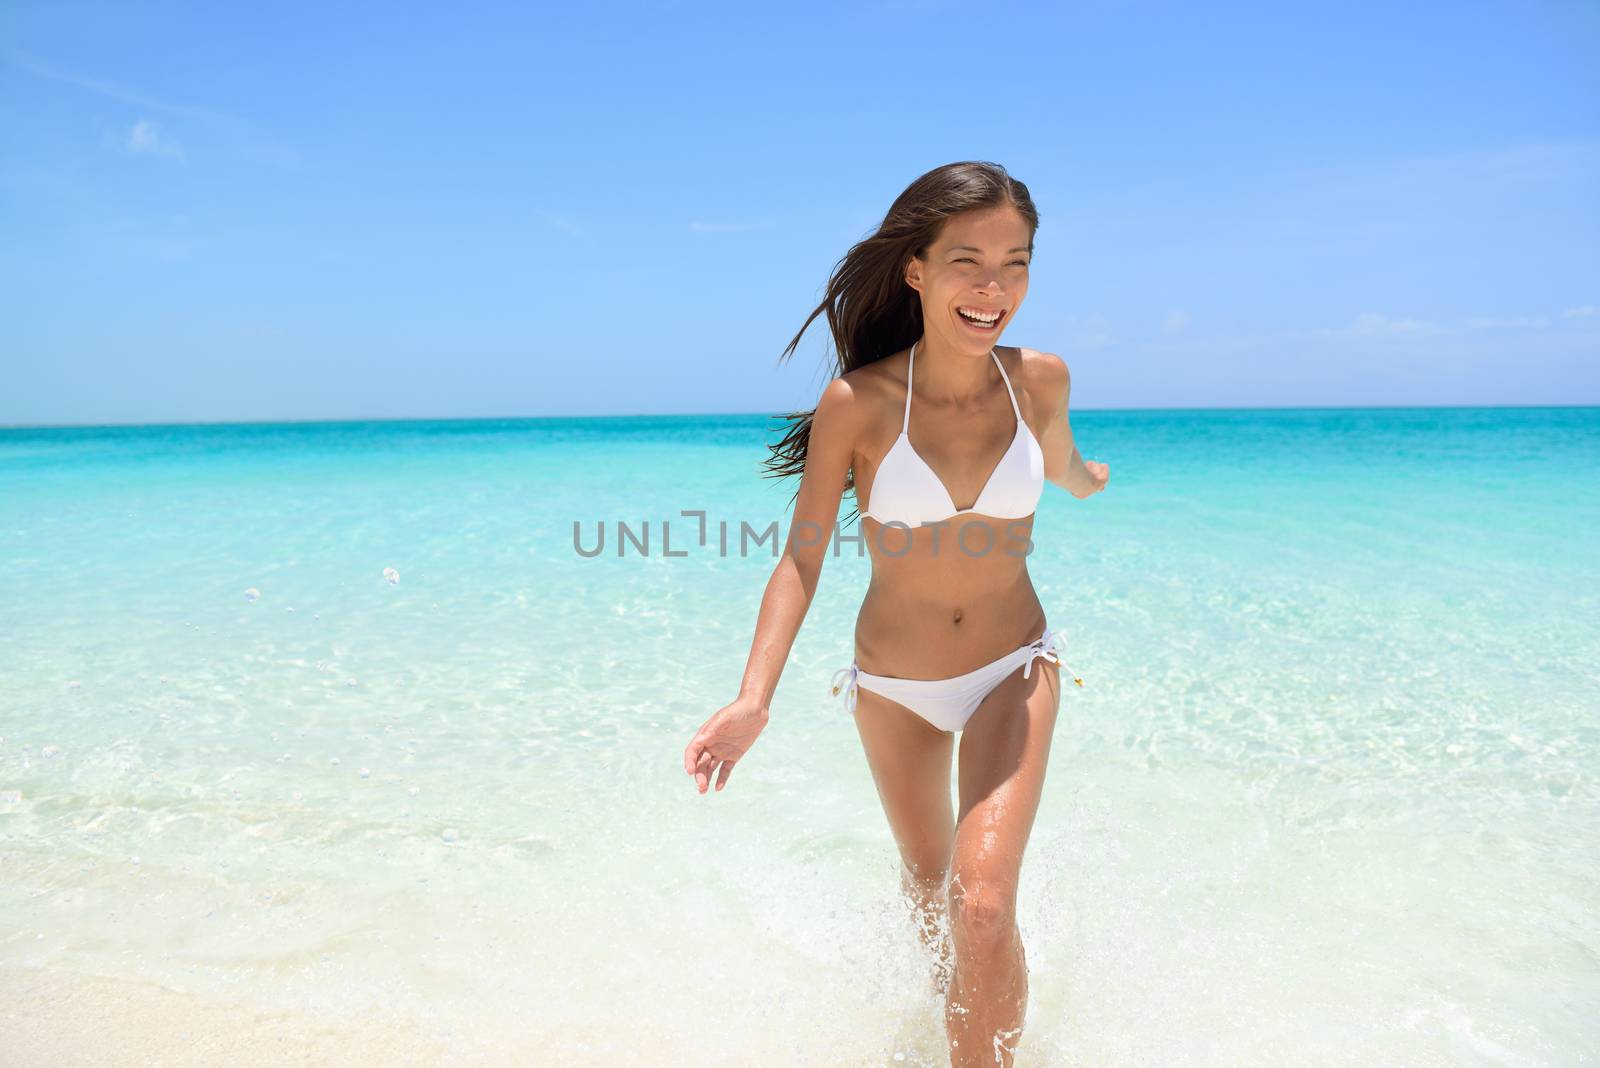 Cheerful young woman running on beach having fun laughing during summer holidays travel. Exhilarated female is in white bikini smiling. Beautiful tourist is enjoying vacation on beach.